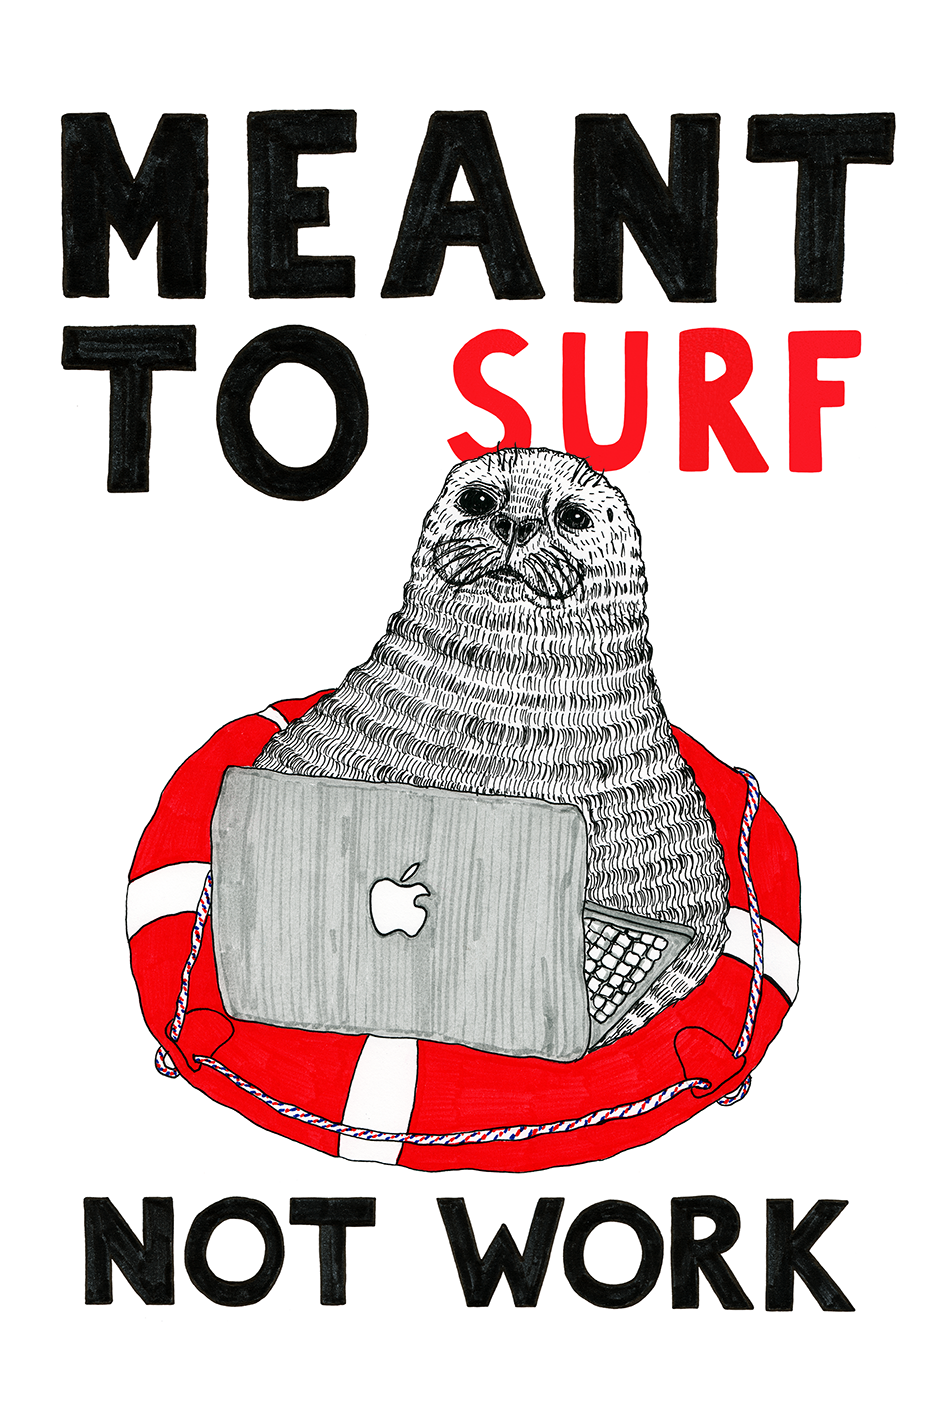 Meant to Surf not Work 10x15 cm Fine Art Card